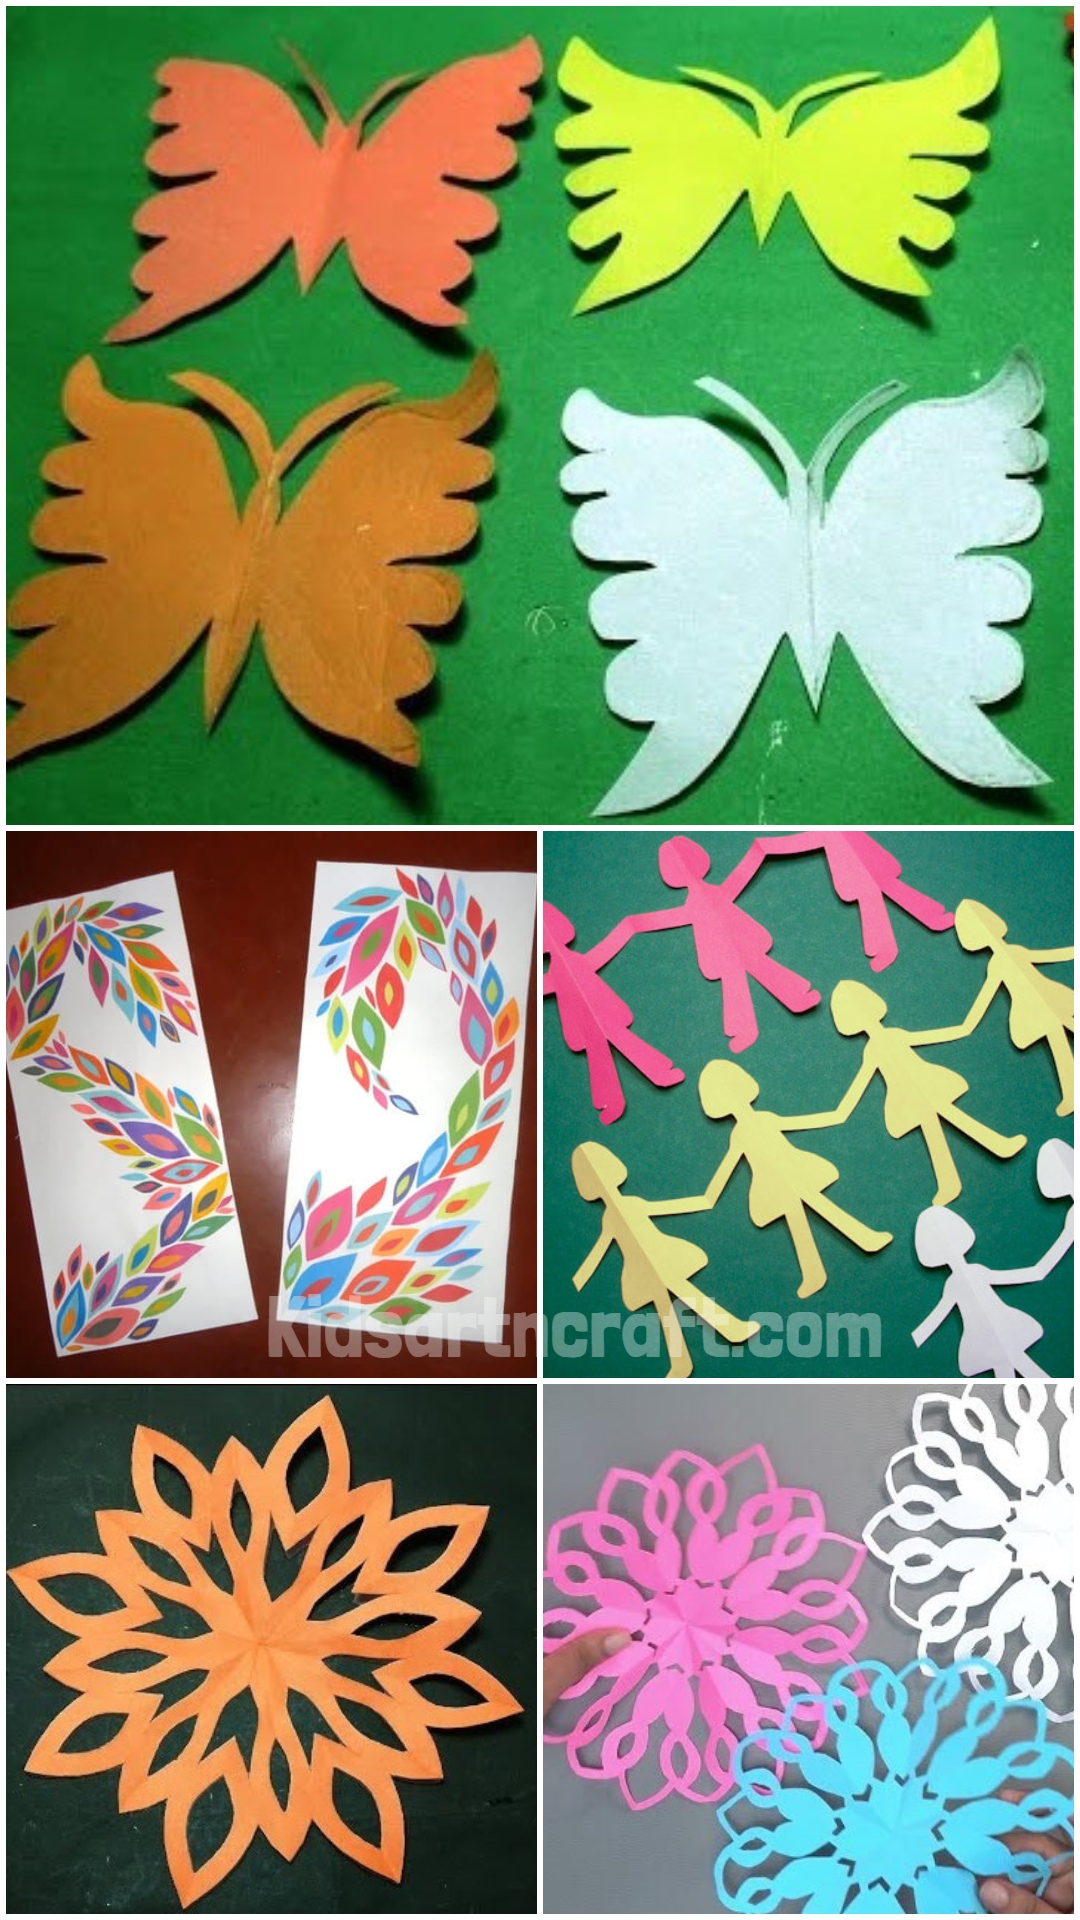 Easy Paper Design  Easy Paper Cutting Designs Step By Step  Easy Paper  Designs for Decoration  Easy Paper Cutting Craft Design  video Dailymotion